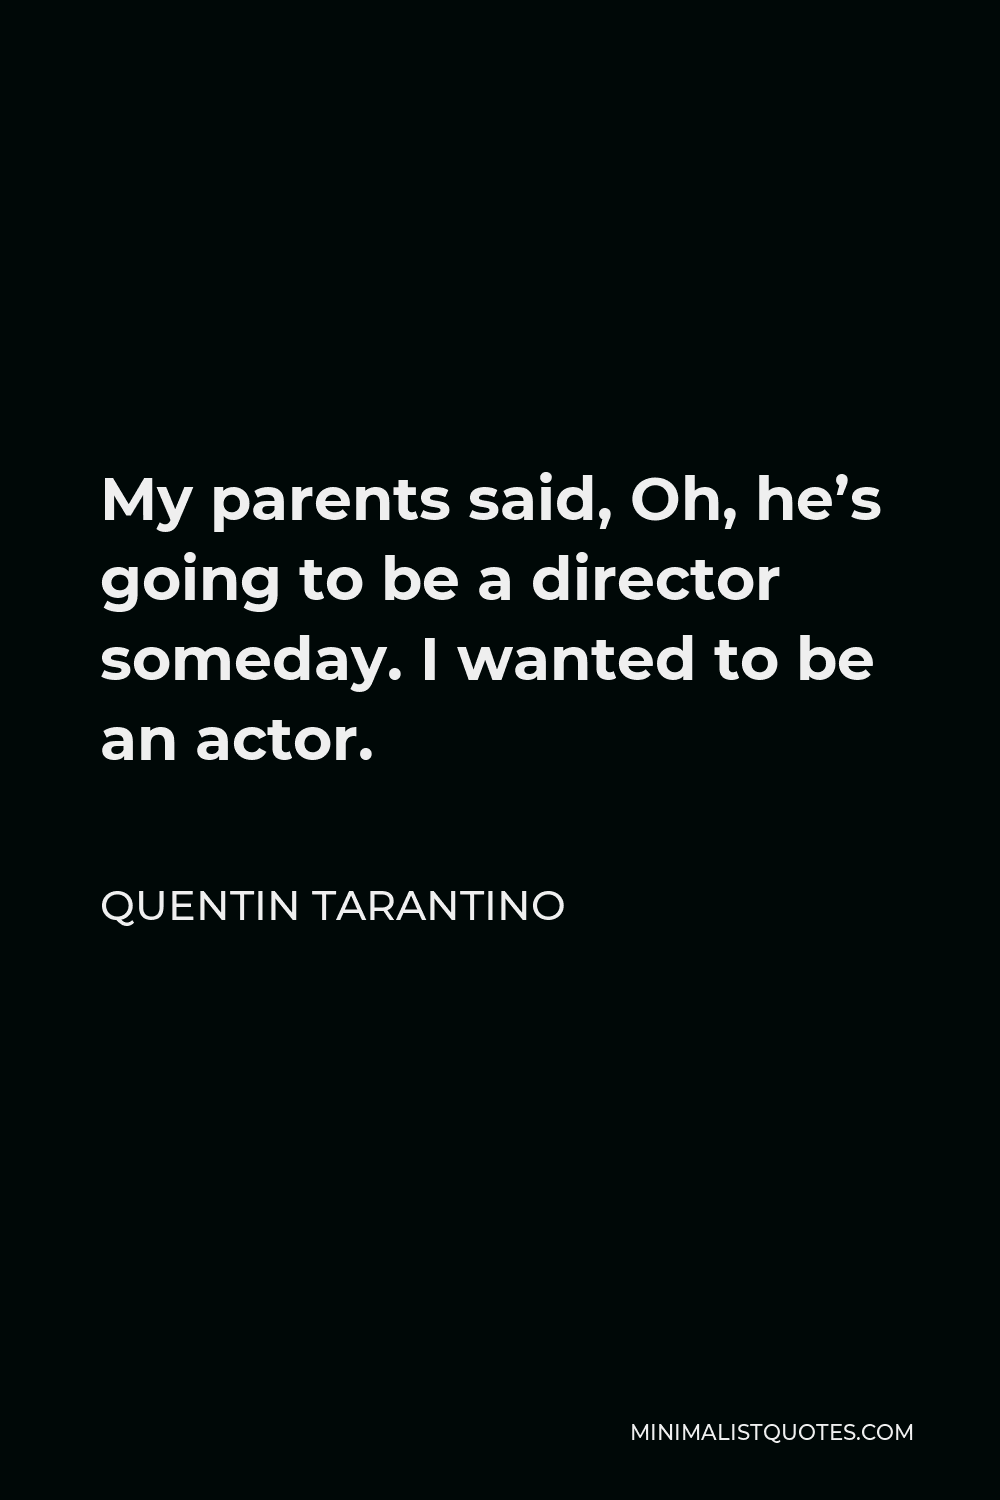 Quentin Tarantino Quote - My parents said, Oh, he’s going to be a director someday. I wanted to be an actor.